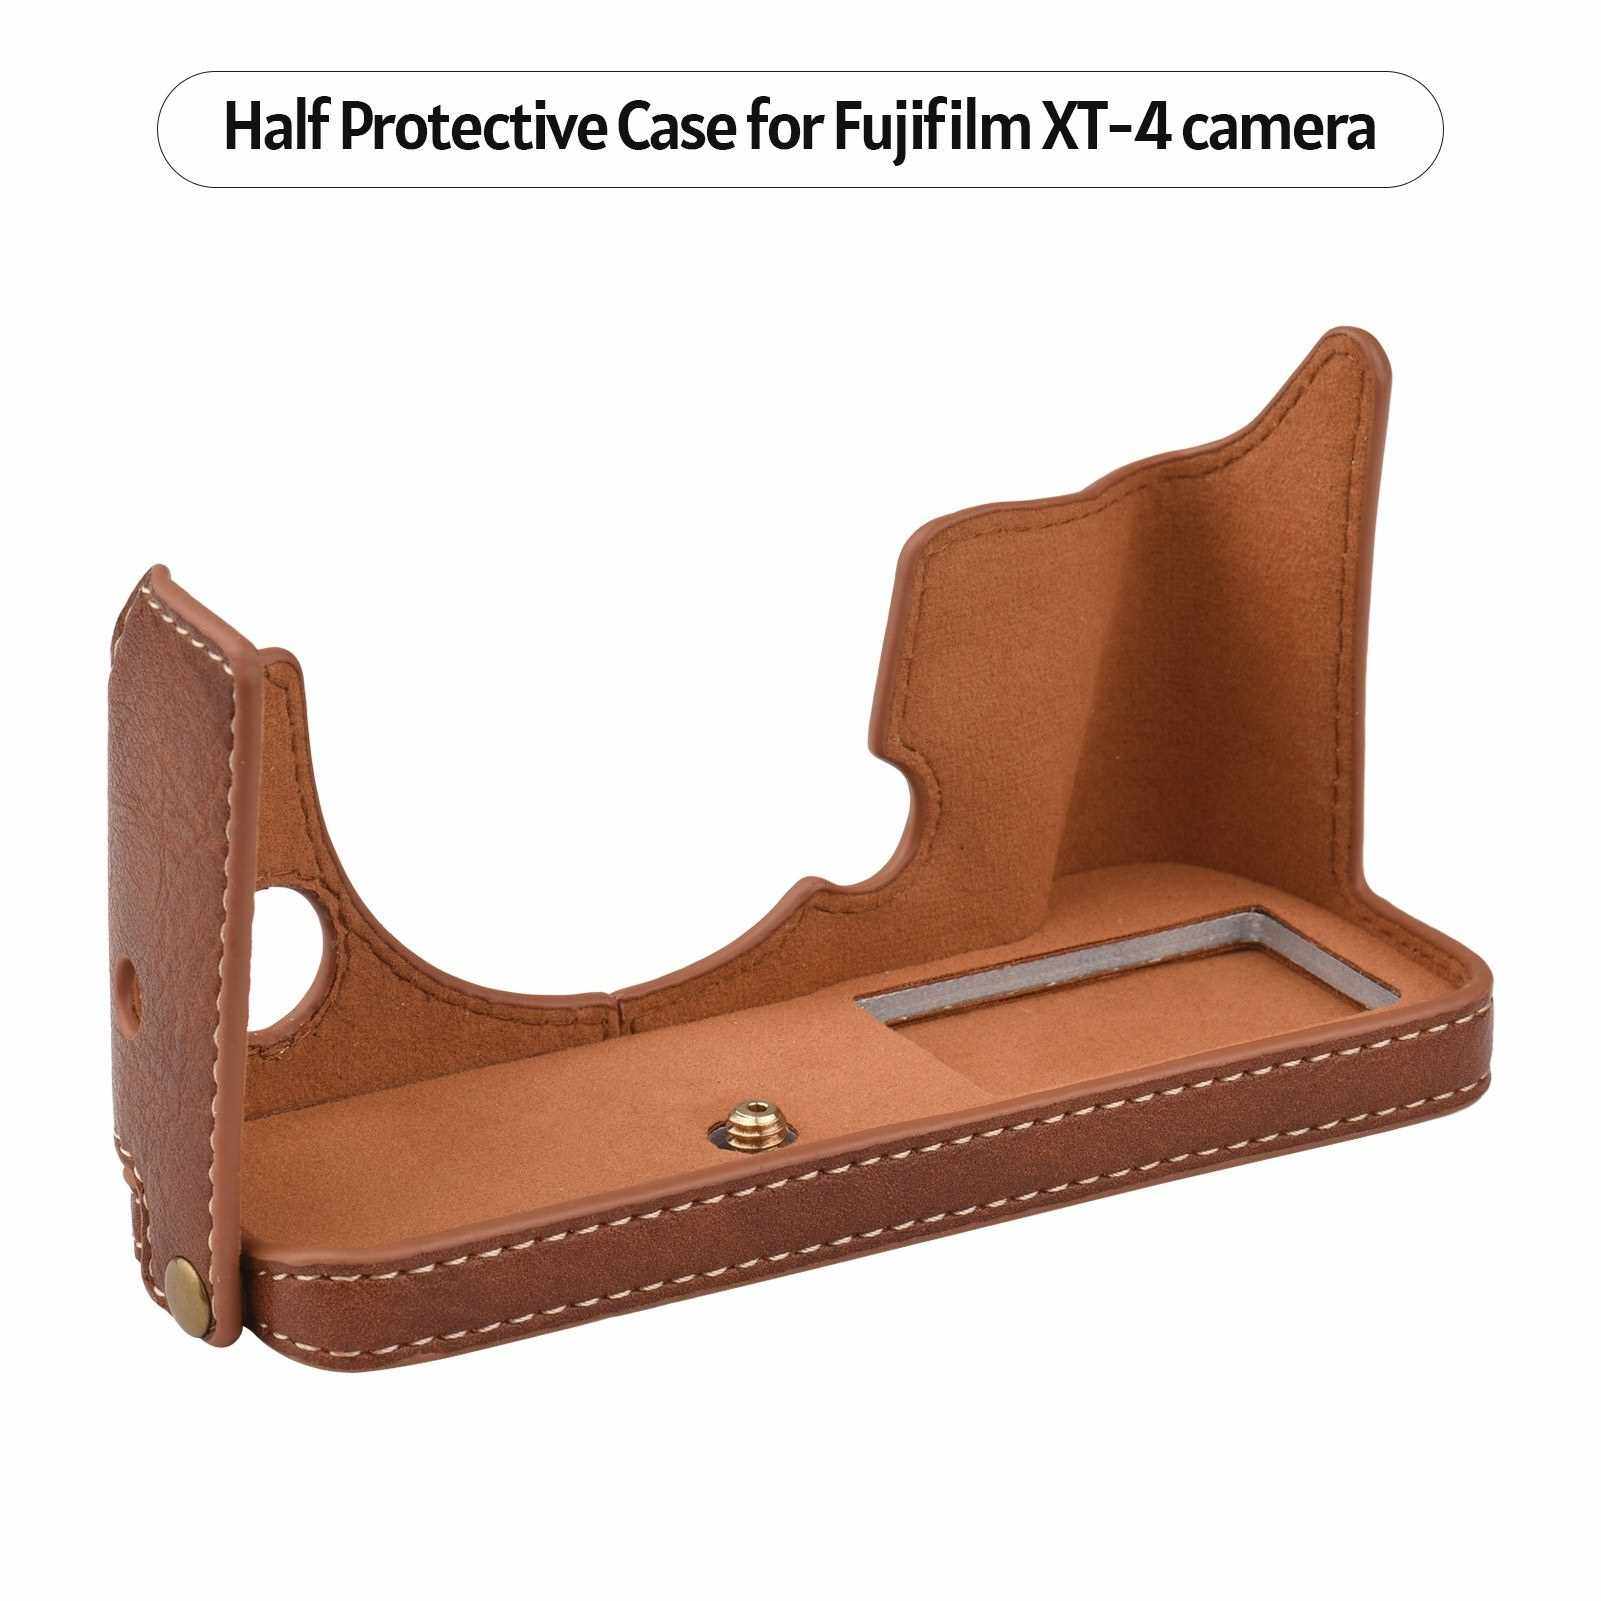 PU Leather Camera Case Bottom Opening Version Camera Protective Half Bag with Tripod Mount Thread Strap Hole Replacement for Fujifilm XT4 XT-4 Camera (Brown)